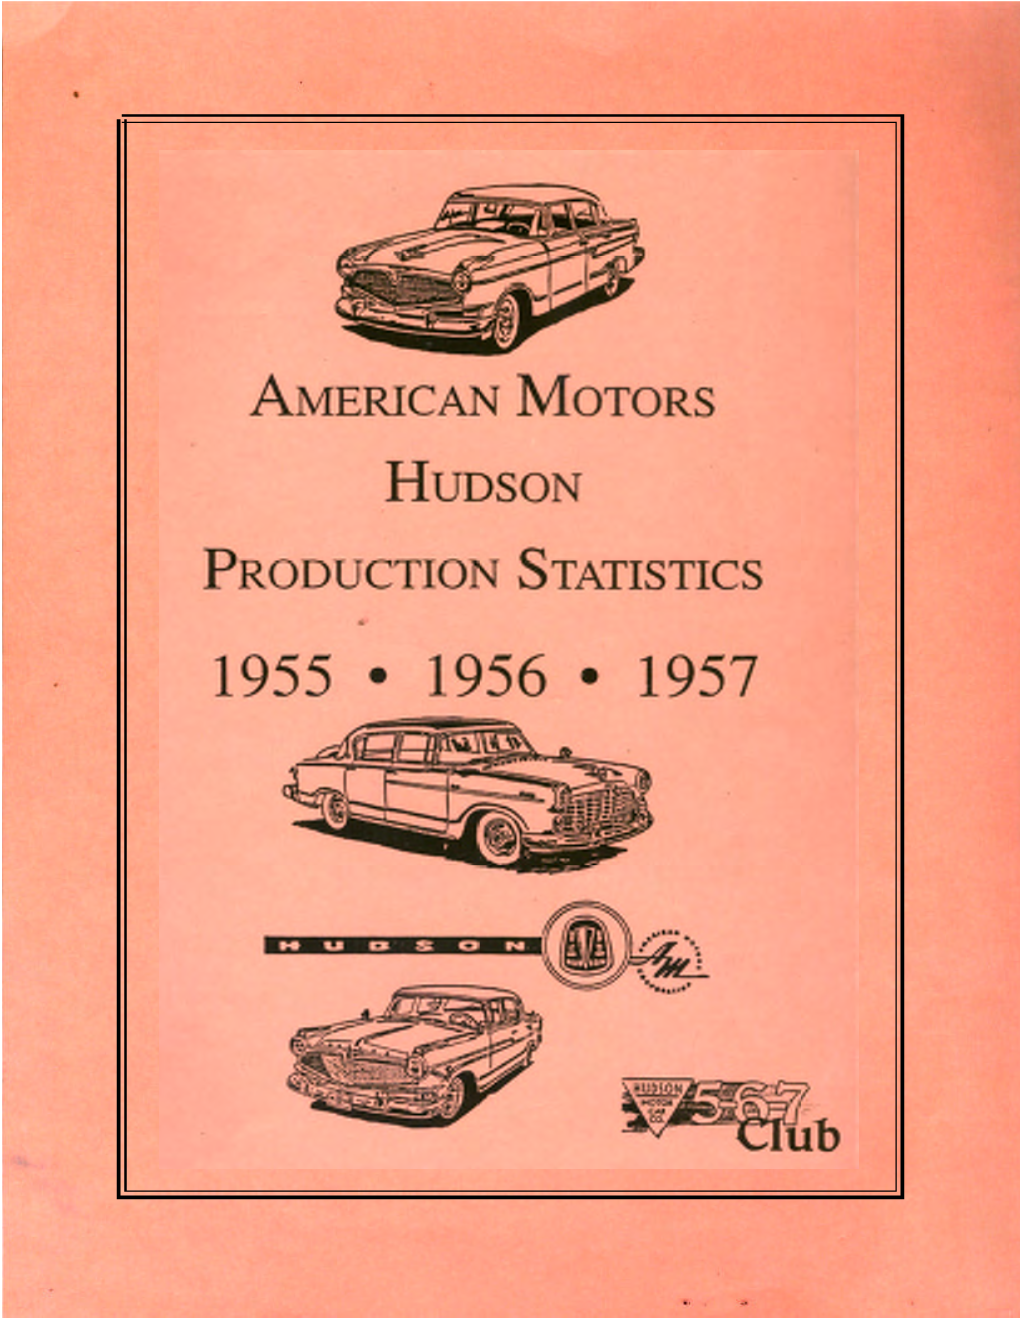 1955 Hudson) Due to the Numerous Requests Concerning 5500 Series Production, I Have Attached for Your Record Purposes a Final Summary of 5500 Series Hudson Production